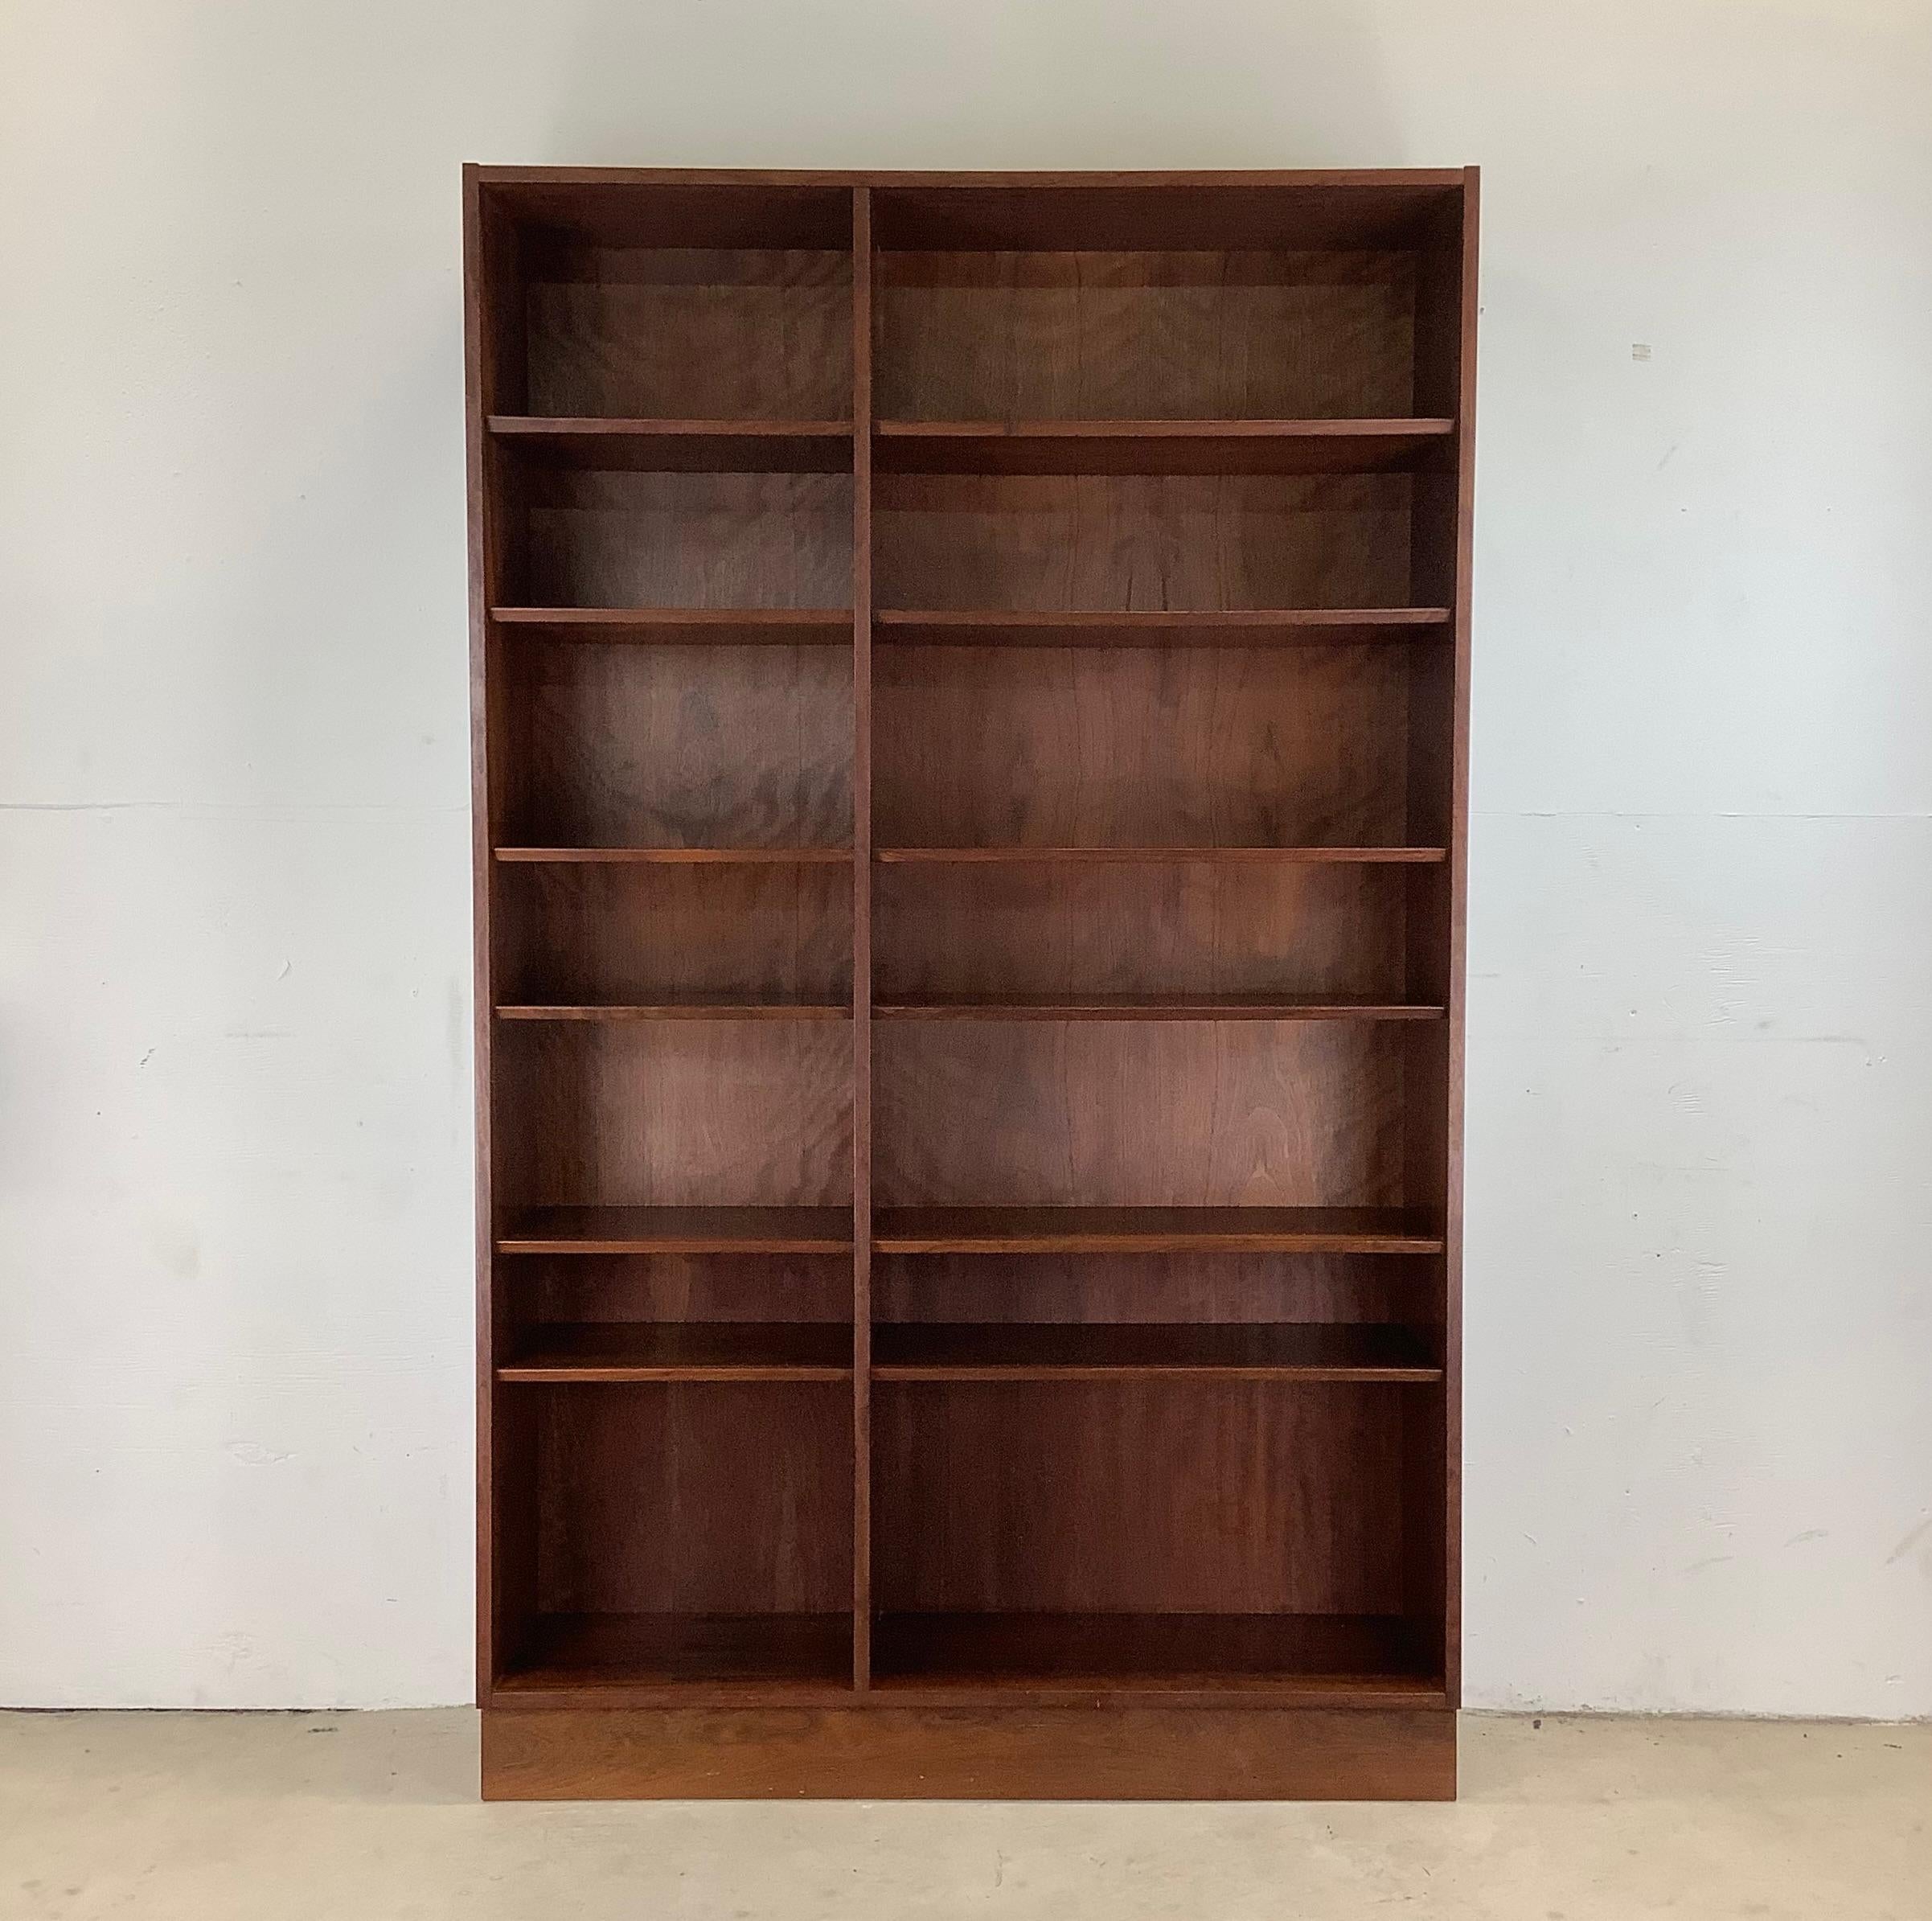 This impressive offset double bookcase boasts an impressive vintage rosewood finish, twelve shelves (ten adjustable), and at almost six and a half feet tall offers plenty of storage and display space for home or office. Matching single rosewood